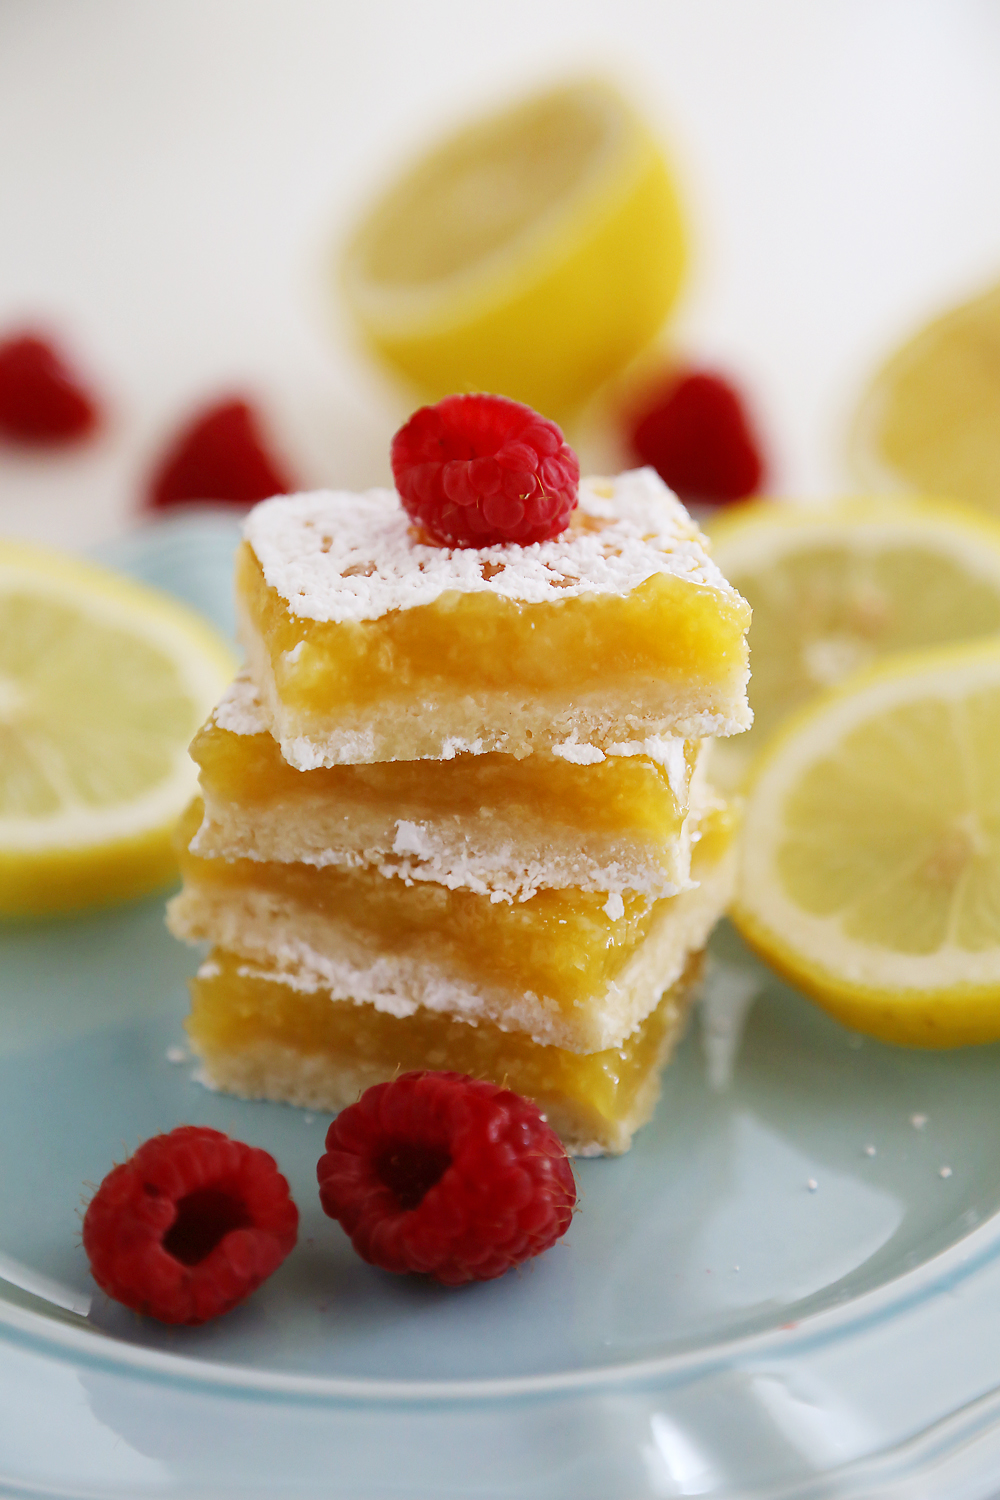 Best Ever Lemon Bars - Made easily 100% from scratch with all-natural ingredients. So easy, sweet and tangy! thecomfortofcooking.com